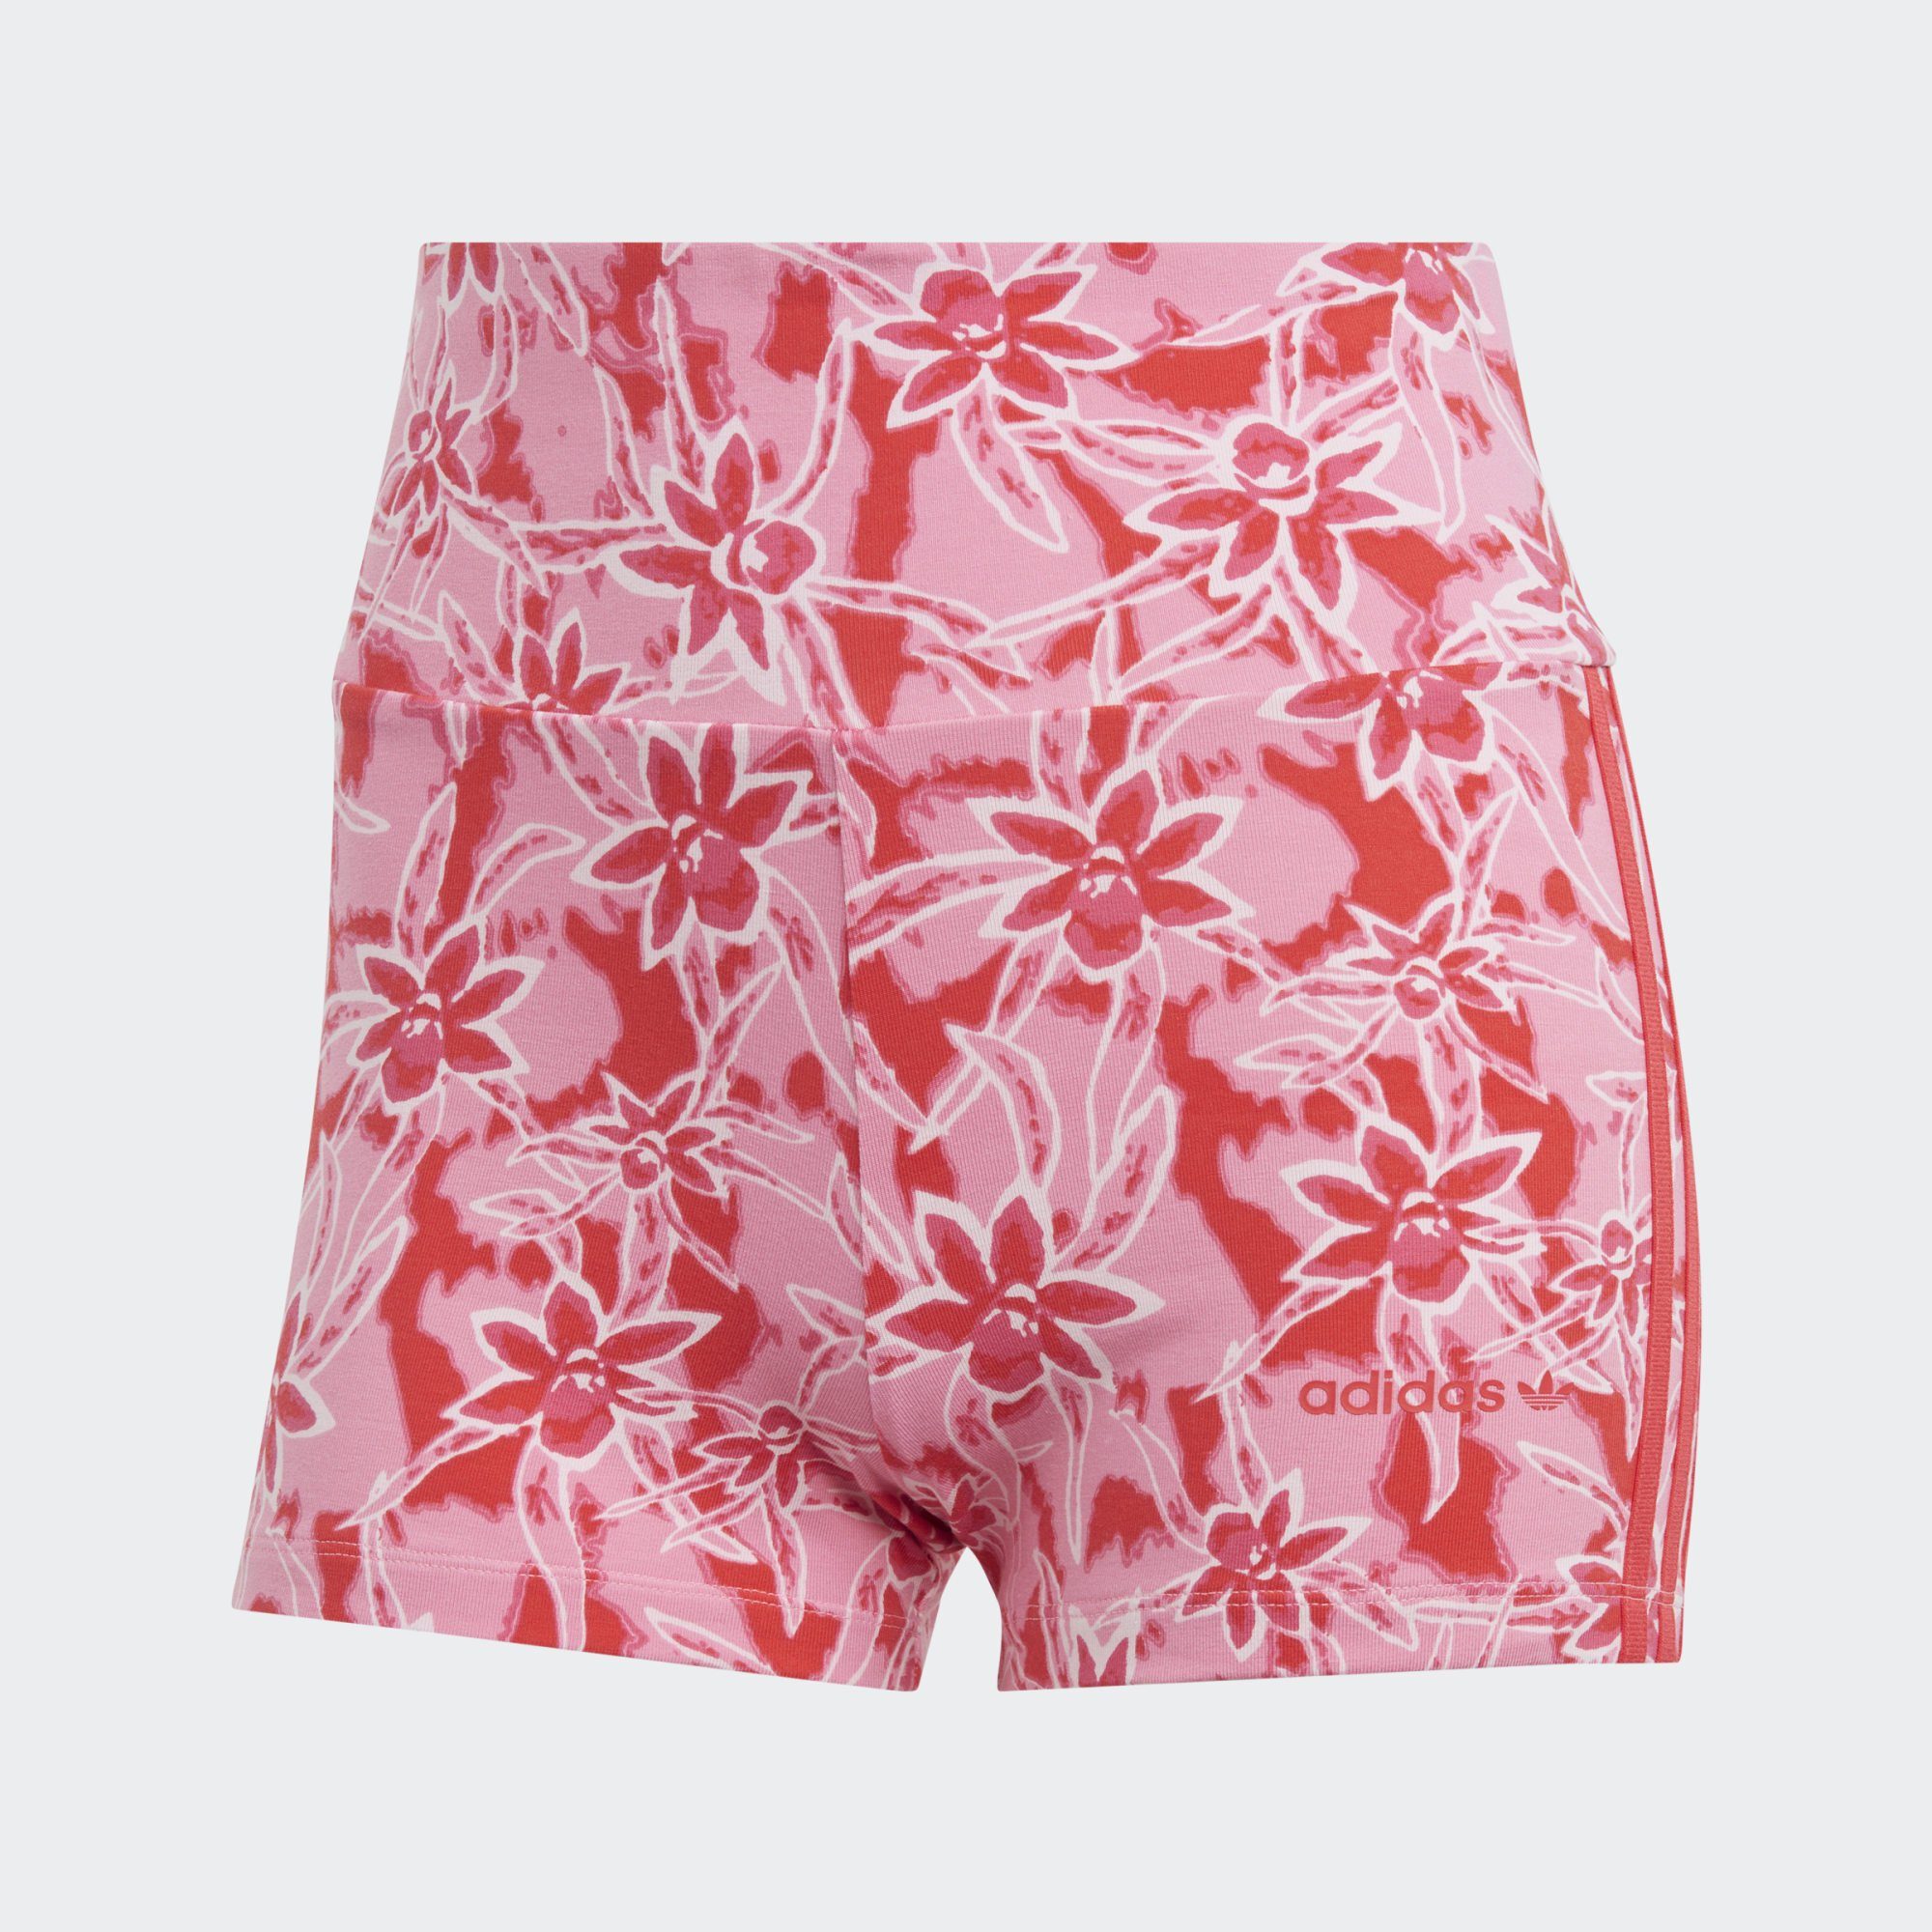 Originals Pink / Multicolor PRINT SHORTS ALLOVER Clear adidas Funktionsshorts